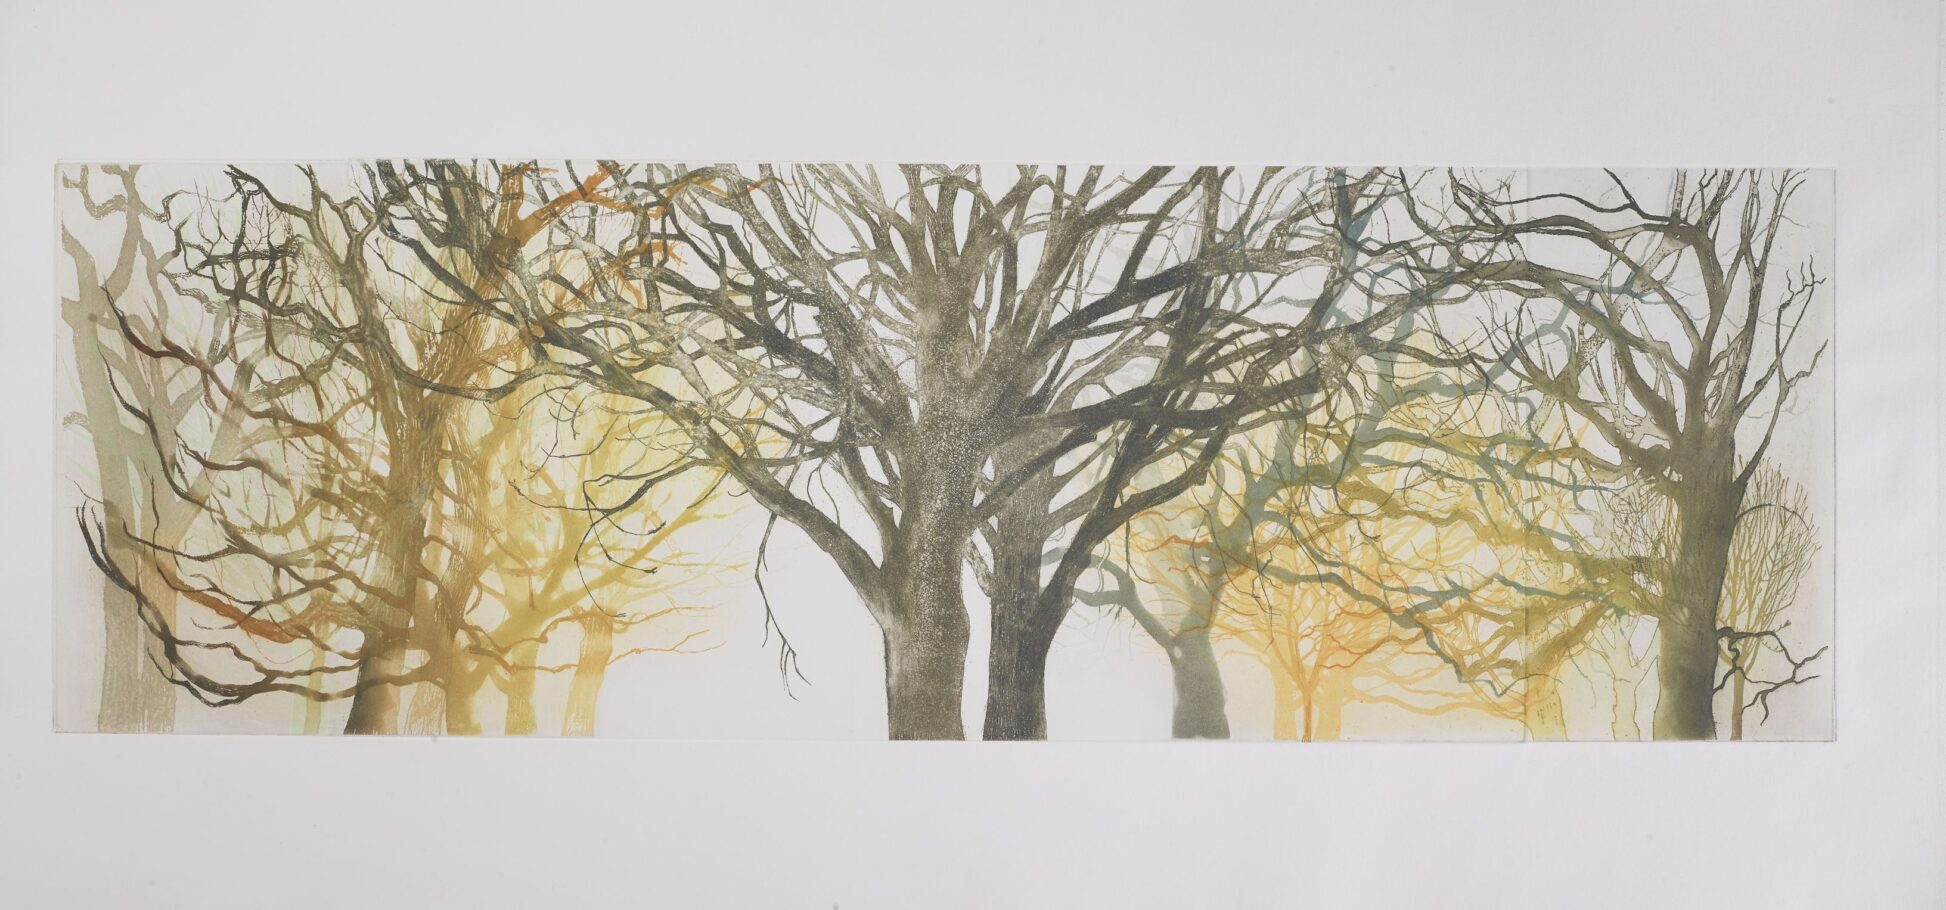 TREE FORMS 1 . IMAGE SIZE 29X90CM ETCHING . EDITION 4 . £850 U/F